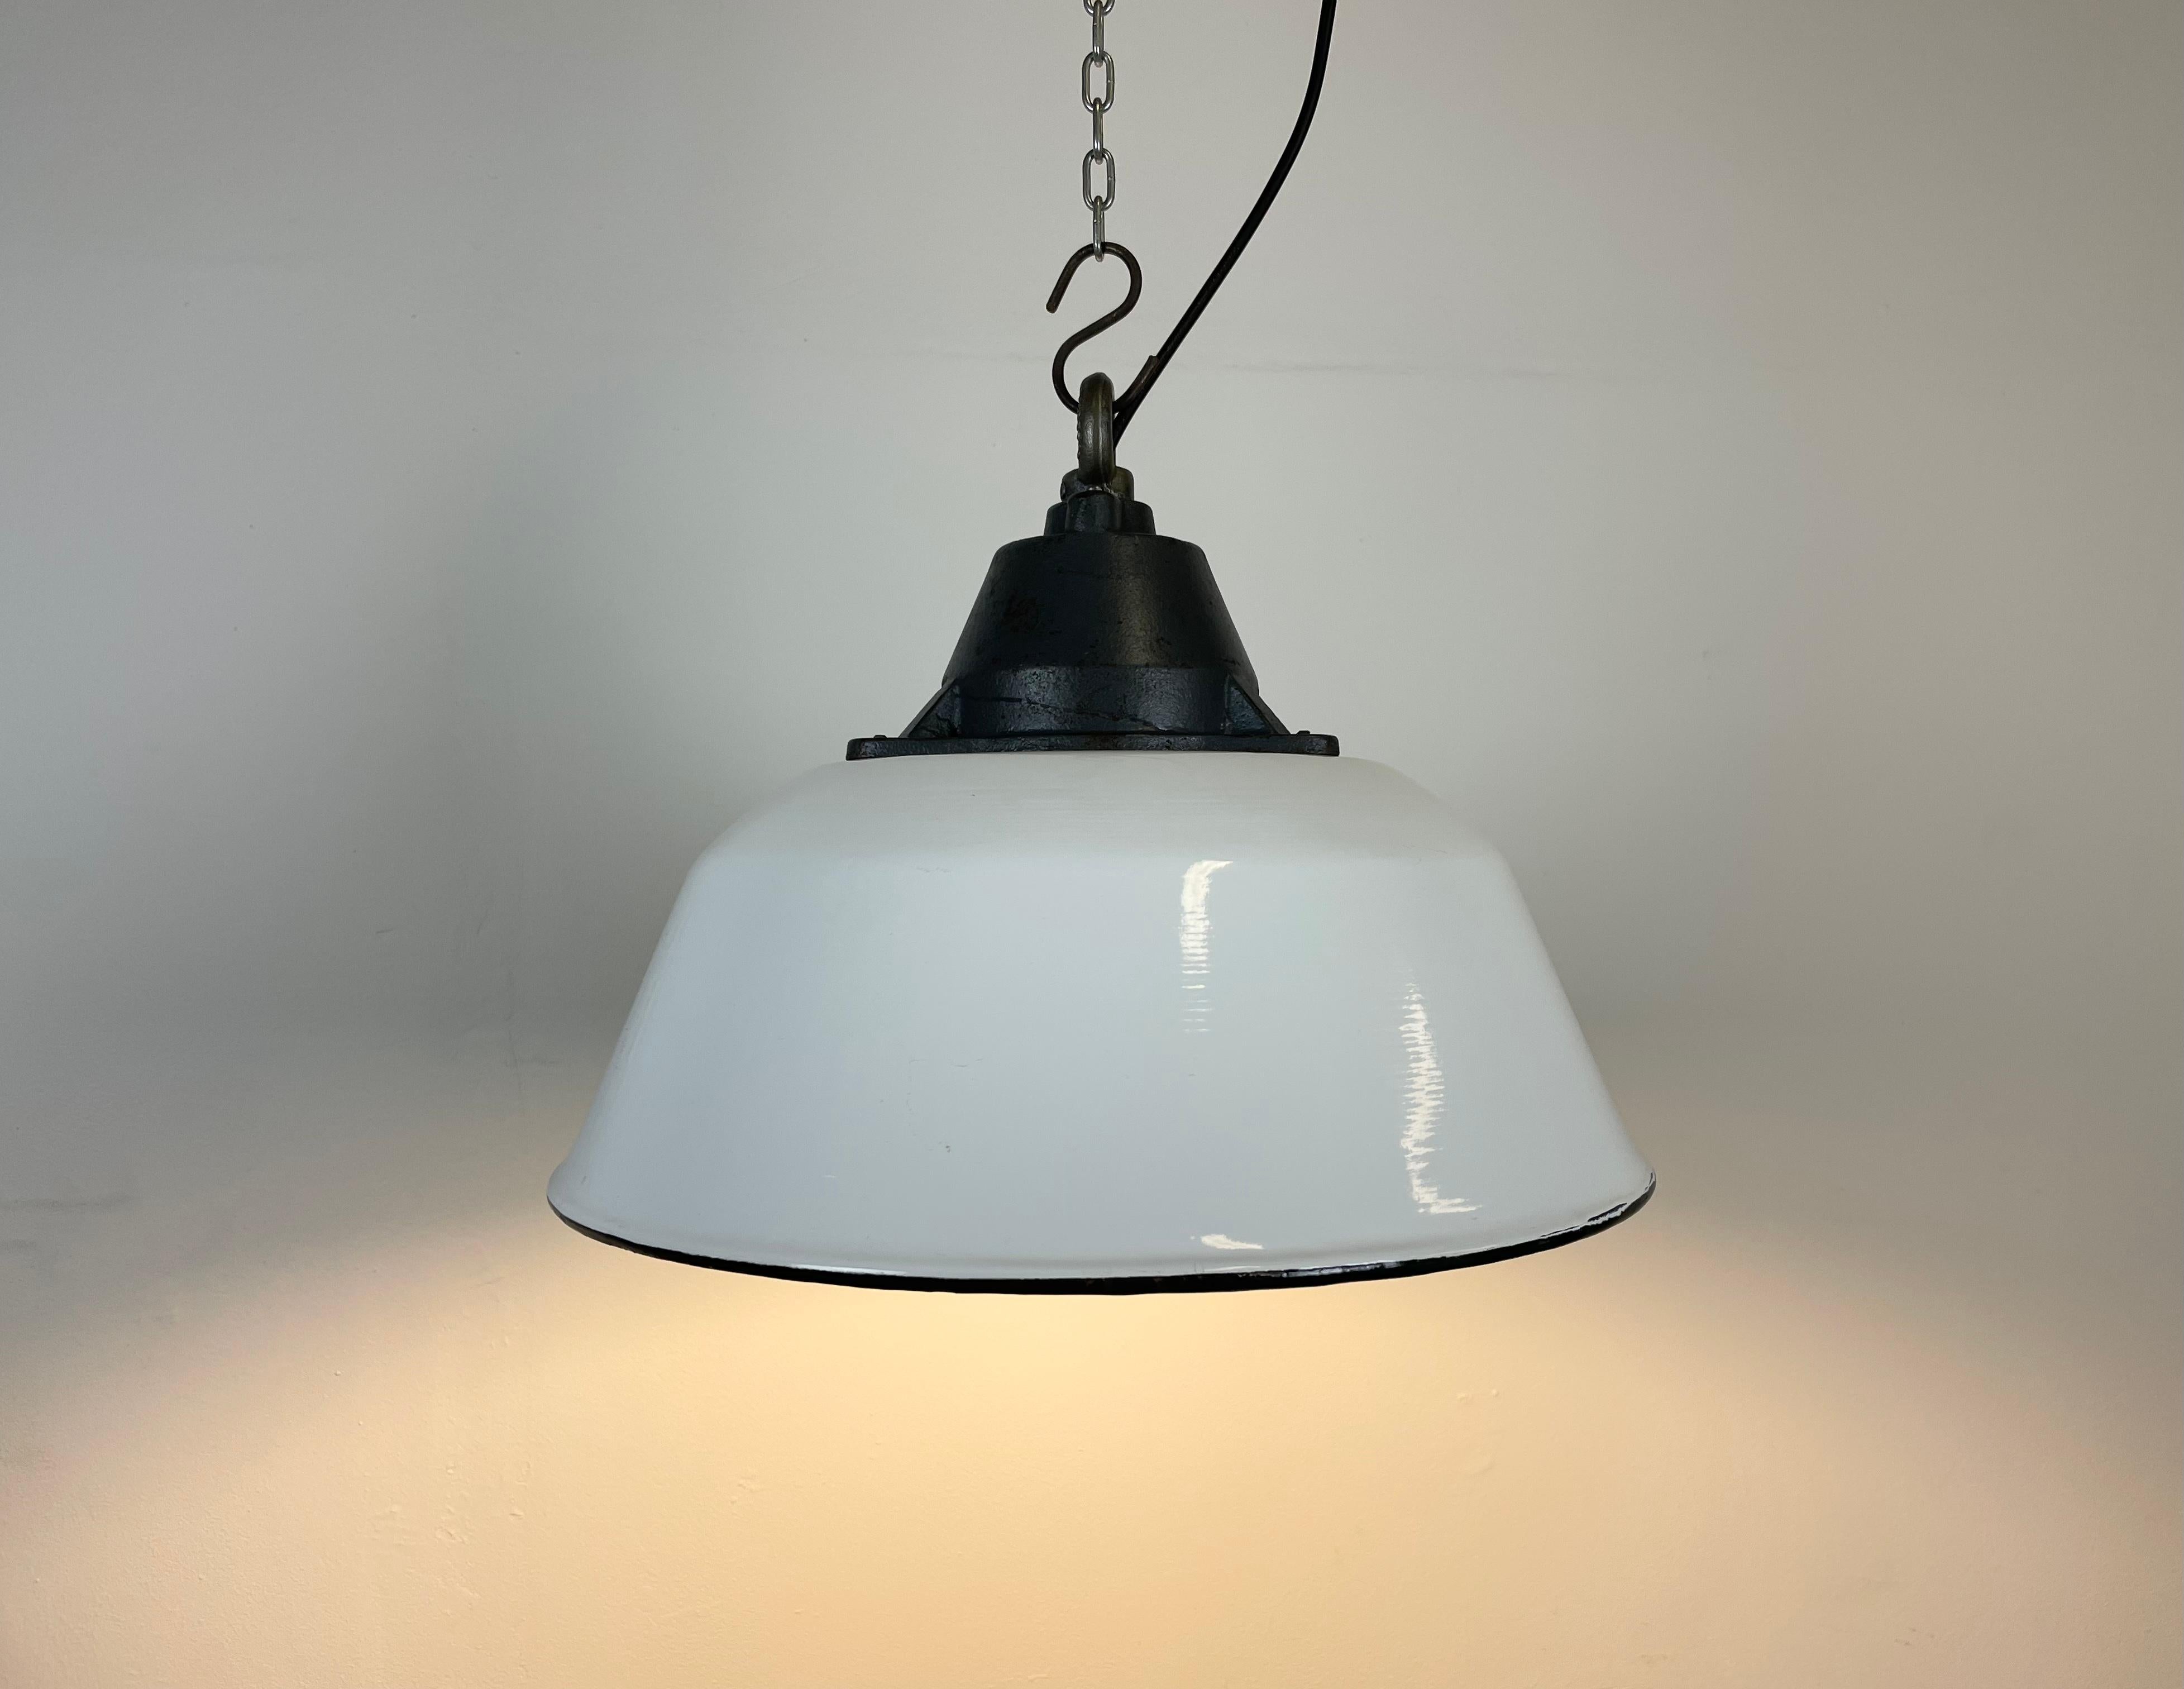 White Enamel and Cast Iron Industrial Pendant Light, 1960s For Sale 2